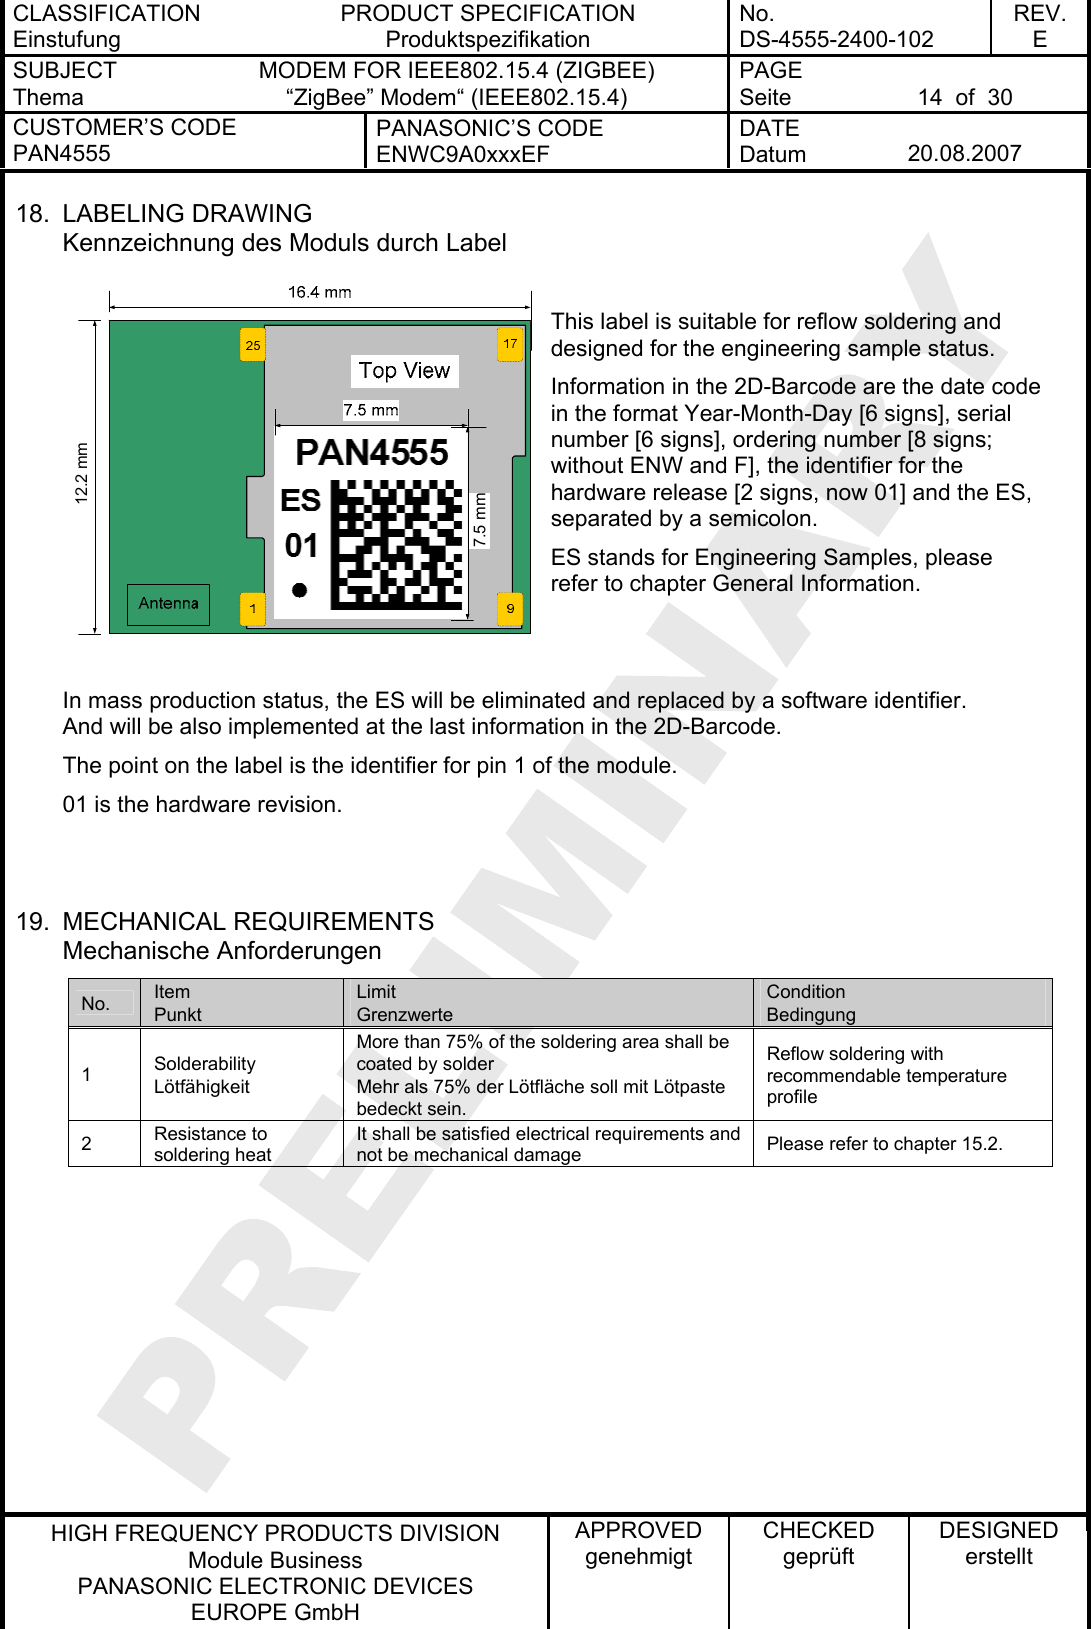 CLASSIFICATION Einstufung PRODUCT SPECIFICATION Produktspezifikation No. DS-4555-2400-102 REV. E SUBJECT Thema MODEM FOR IEEE802.15.4 (ZIGBEE) “ZigBee” Modem“ (IEEE802.15.4) PAGE Seite  14  of  30 CUSTOMER’S CODE PAN4555 PANASONIC’S CODE ENWC9A0xxxEF DATE Datum  20.08.2007   HIGH FREQUENCY PRODUCTS DIVISION Module Business PANASONIC ELECTRONIC DEVICES  EUROPE GmbH APPROVED genehmigt CHECKED geprüft DESIGNED erstellt 18. LABELING DRAWING Kennzeichnung des Moduls durch Label  This label is suitable for reflow soldering and designed for the engineering sample status. Information in the 2D-Barcode are the date cin the format Year-Month-Day [6 signs], serial number [6 signs], ordering number [8 signs; without ENW and F], the identifier for the hardware release [2 signs, now 01] and the ES, separated by a semicolon. ode ES stands for Engineering Samples, please refer to chapter General Information.   In mass production status, the ES will be eliminated and replaced by a software identifier. And will be also implemented at the last information in the 2D-Barcode. The point on the label is the identifier for pin 1 of the module. 01 is the hardware revision.   7.5 mm12.2 mm19. MECHANICAL REQUIREMENTS Mechanische Anforderungen No.  Item Punkt Limit Grenzwerte Condition Bedingung 1  Solderability Lötfähigkeit More than 75% of the soldering area shall be coated by solder Mehr als 75% der Lötfläche soll mit Lötpaste bedeckt sein. Reflow soldering with recommendable temperature profile 2  Resistance to soldering heat It shall be satisfied electrical requirements and not be mechanical damage  Please refer to chapter 15.2.   